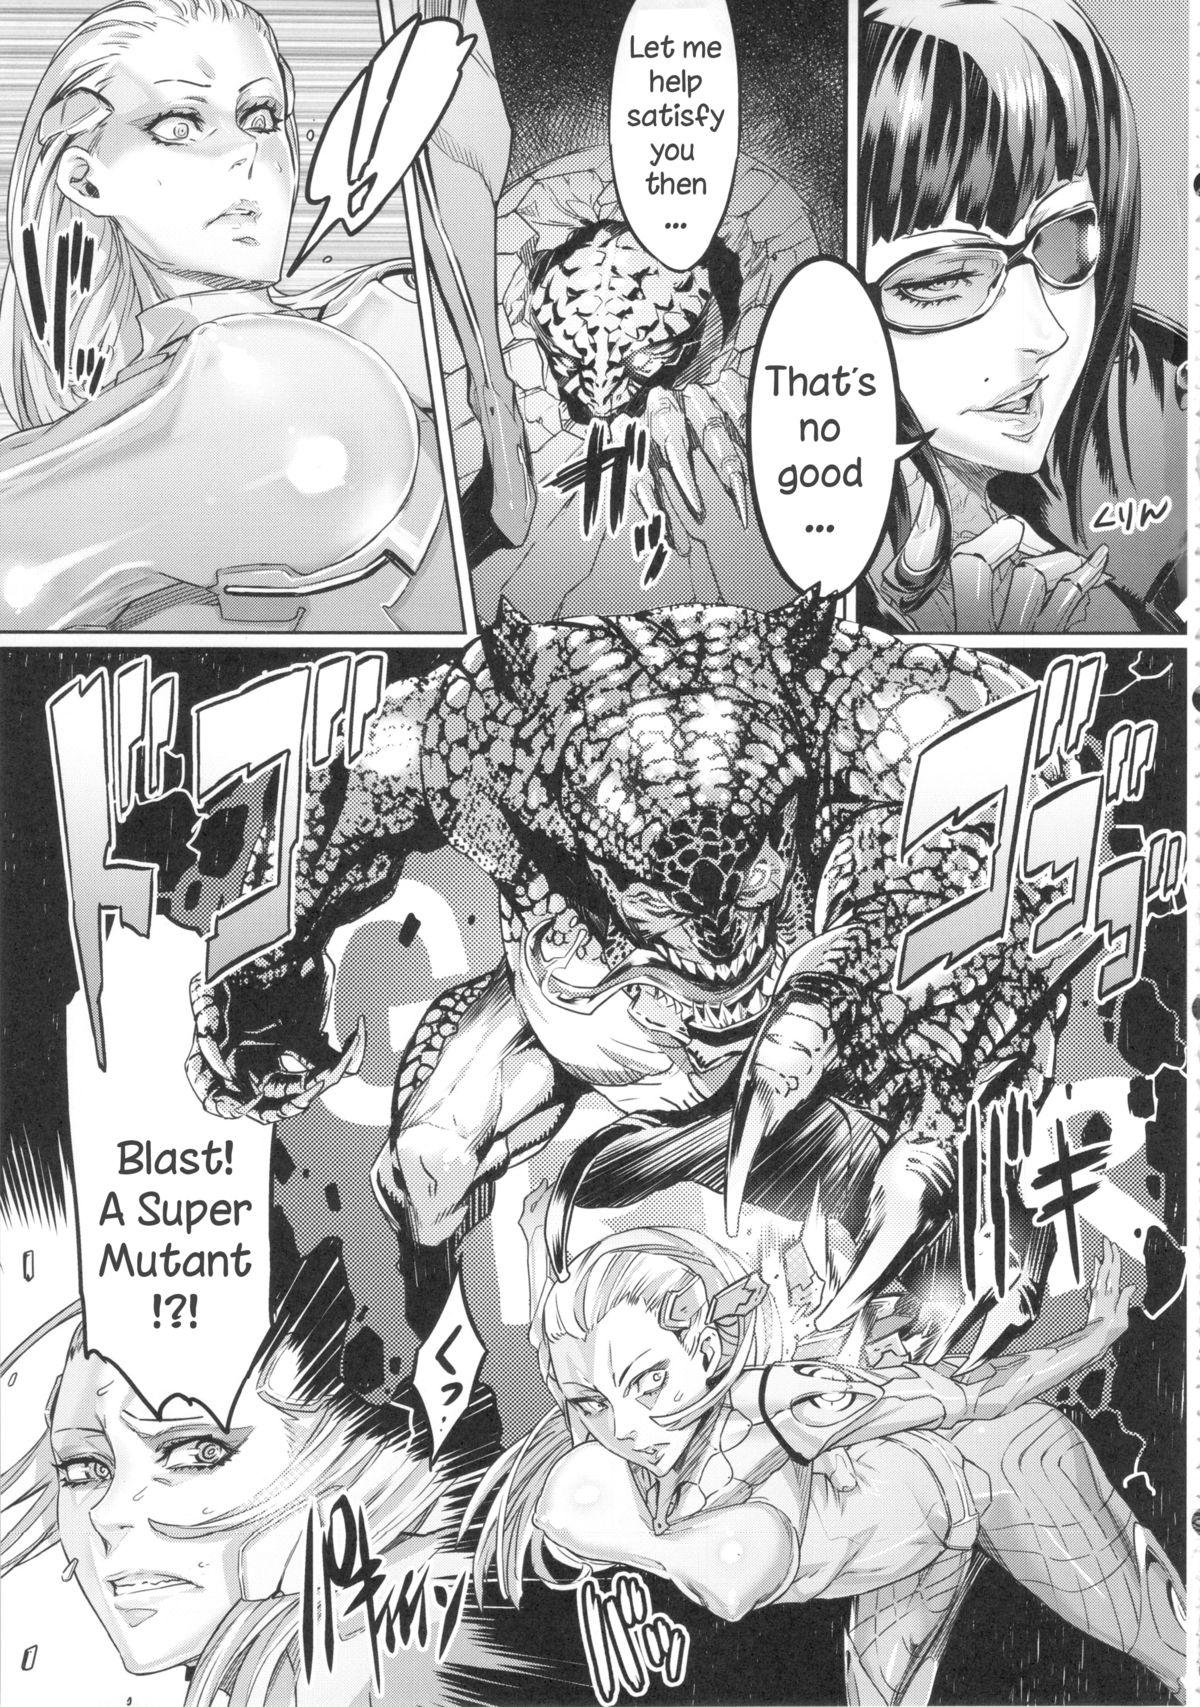 Fucked S★M - Anarchy reigns Bath - Page 4